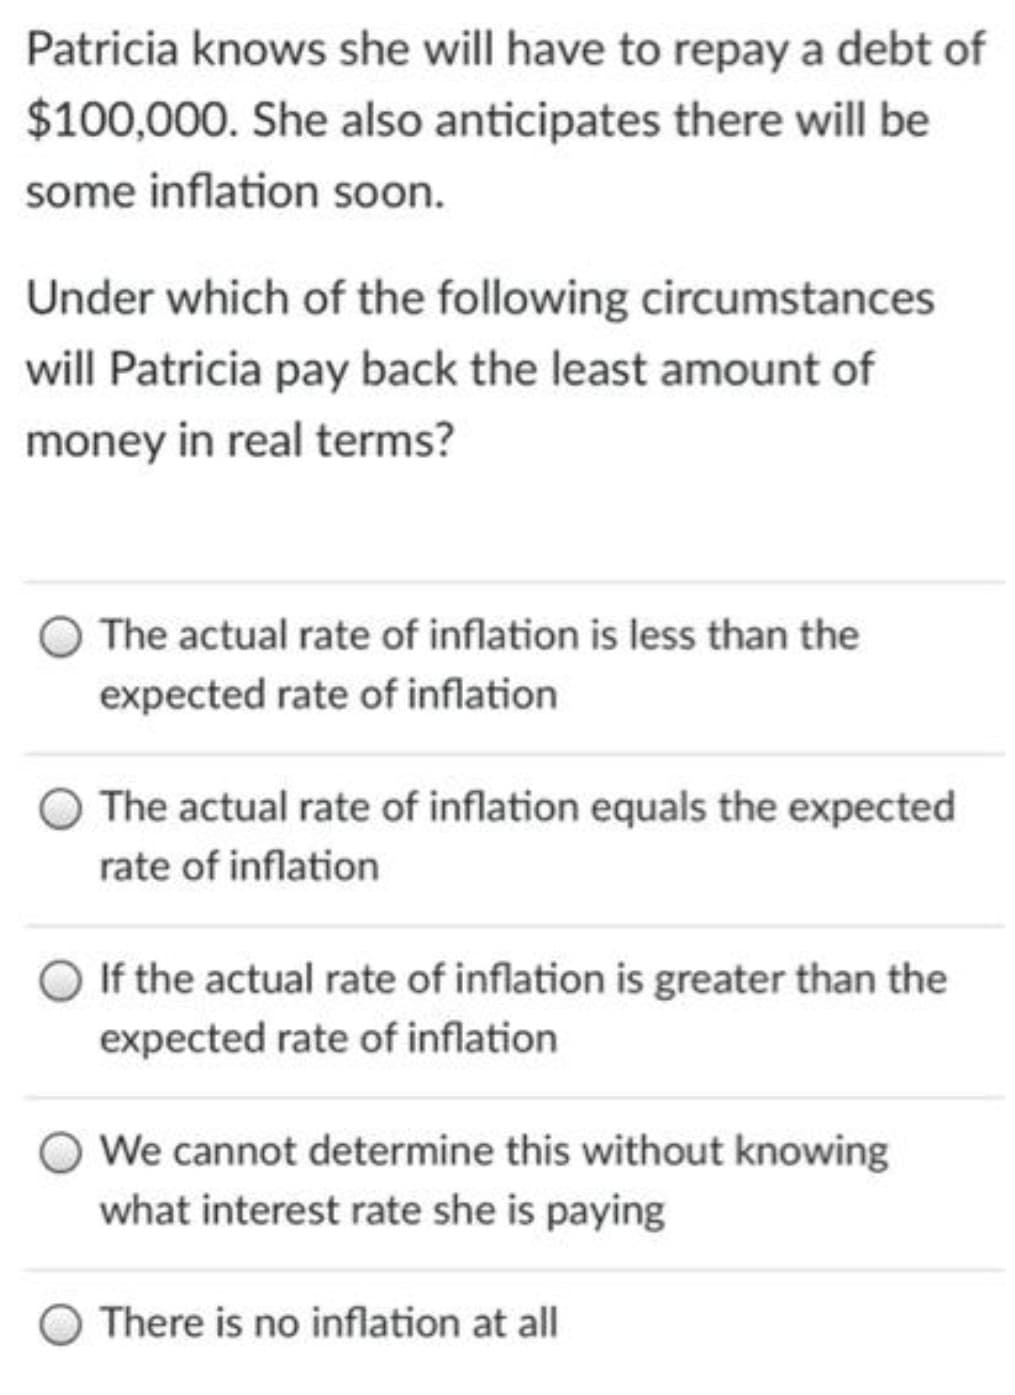 Patricia knows she will have to repay a debt of
$100,000. She also anticipates there will be
some inflation soon.
Under which of the following circumstances
will Patricia pay back the least amount of
money in real terms?
The actual rate of inflation is less than the
expected rate of inflation
The actual rate of inflation equals the expected
rate of inflation
If the actual rate of inflation is greater than the
expected rate of inflation
We cannot determine this without knowing
what interest rate she is paying
There is no inflation at all
